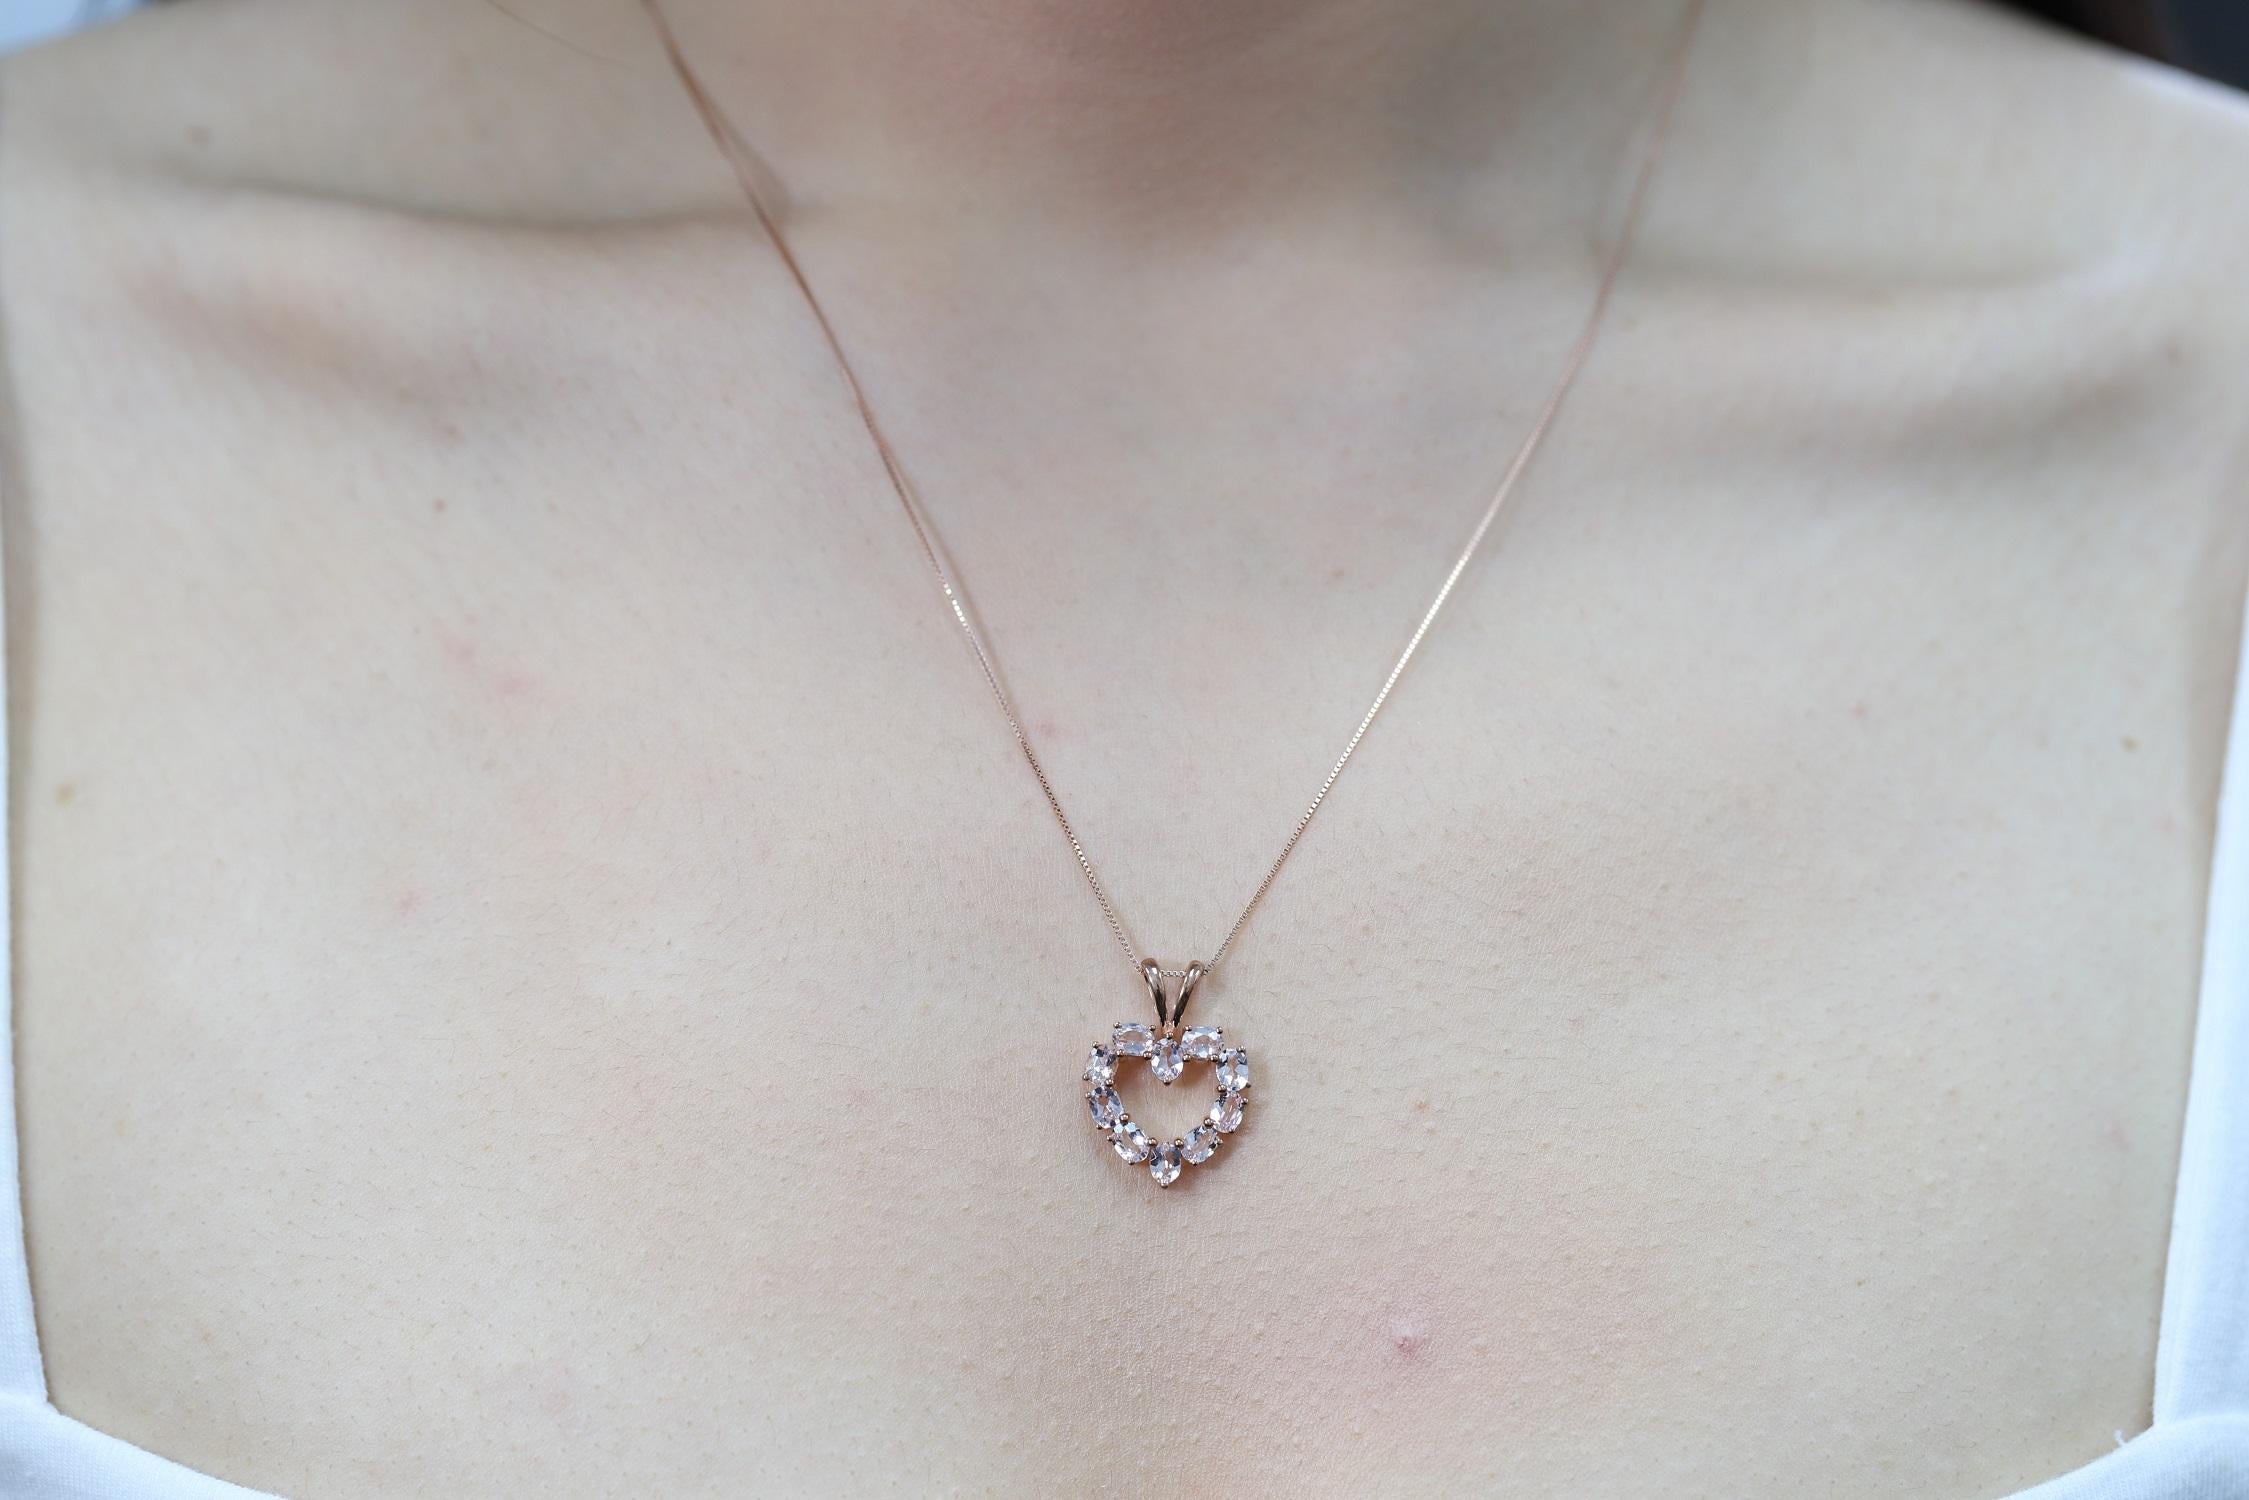 Decorate yourself in elegance with this Pendant, crafted from 10-karat Rose Gold by Gin & Grace Pendant. This Pendant is made up of 3X4 Oval-Cut Prong setting Morganite (10 Pcs) 1.58 Carat. This Pendant weighs 2.22 grams. The gorgeous Pendant hangs